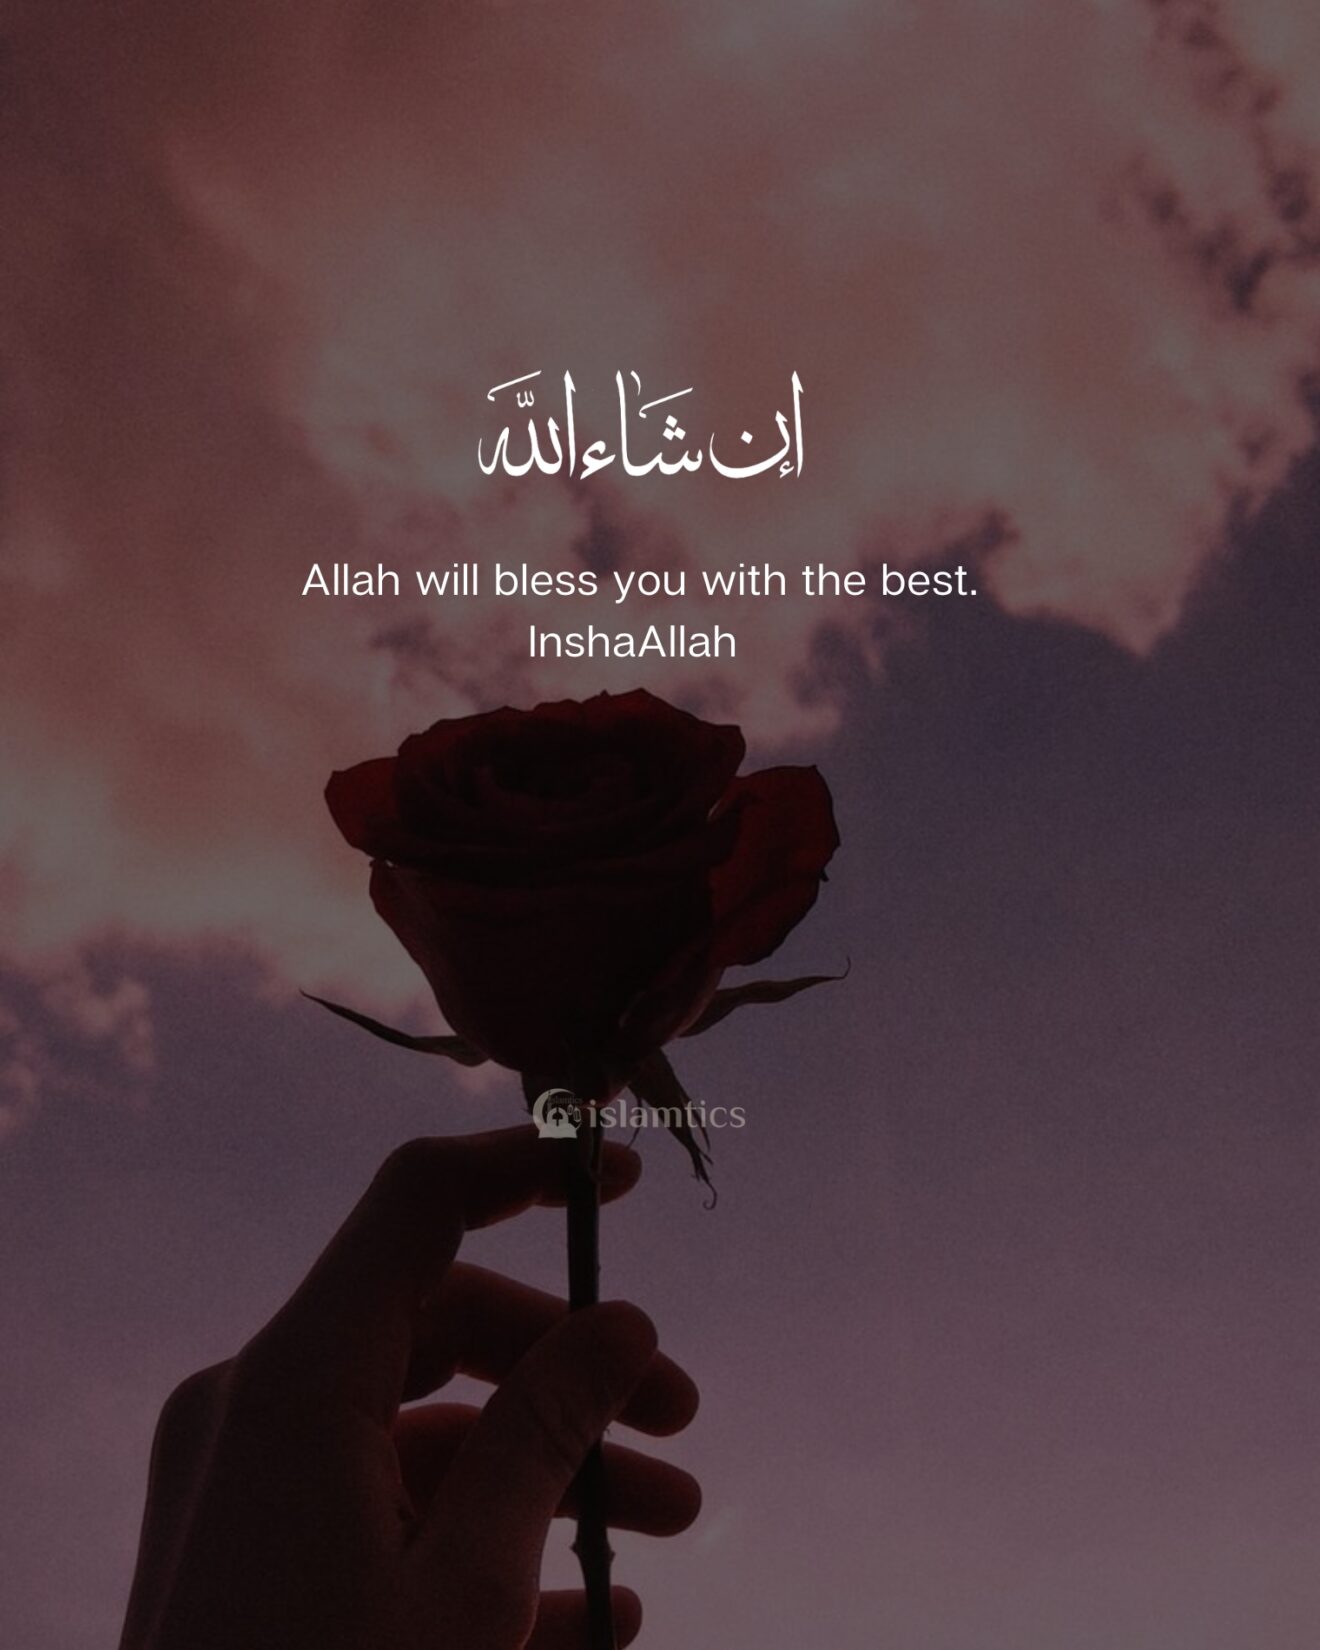 Allah will bless you with the best. InshaAllah